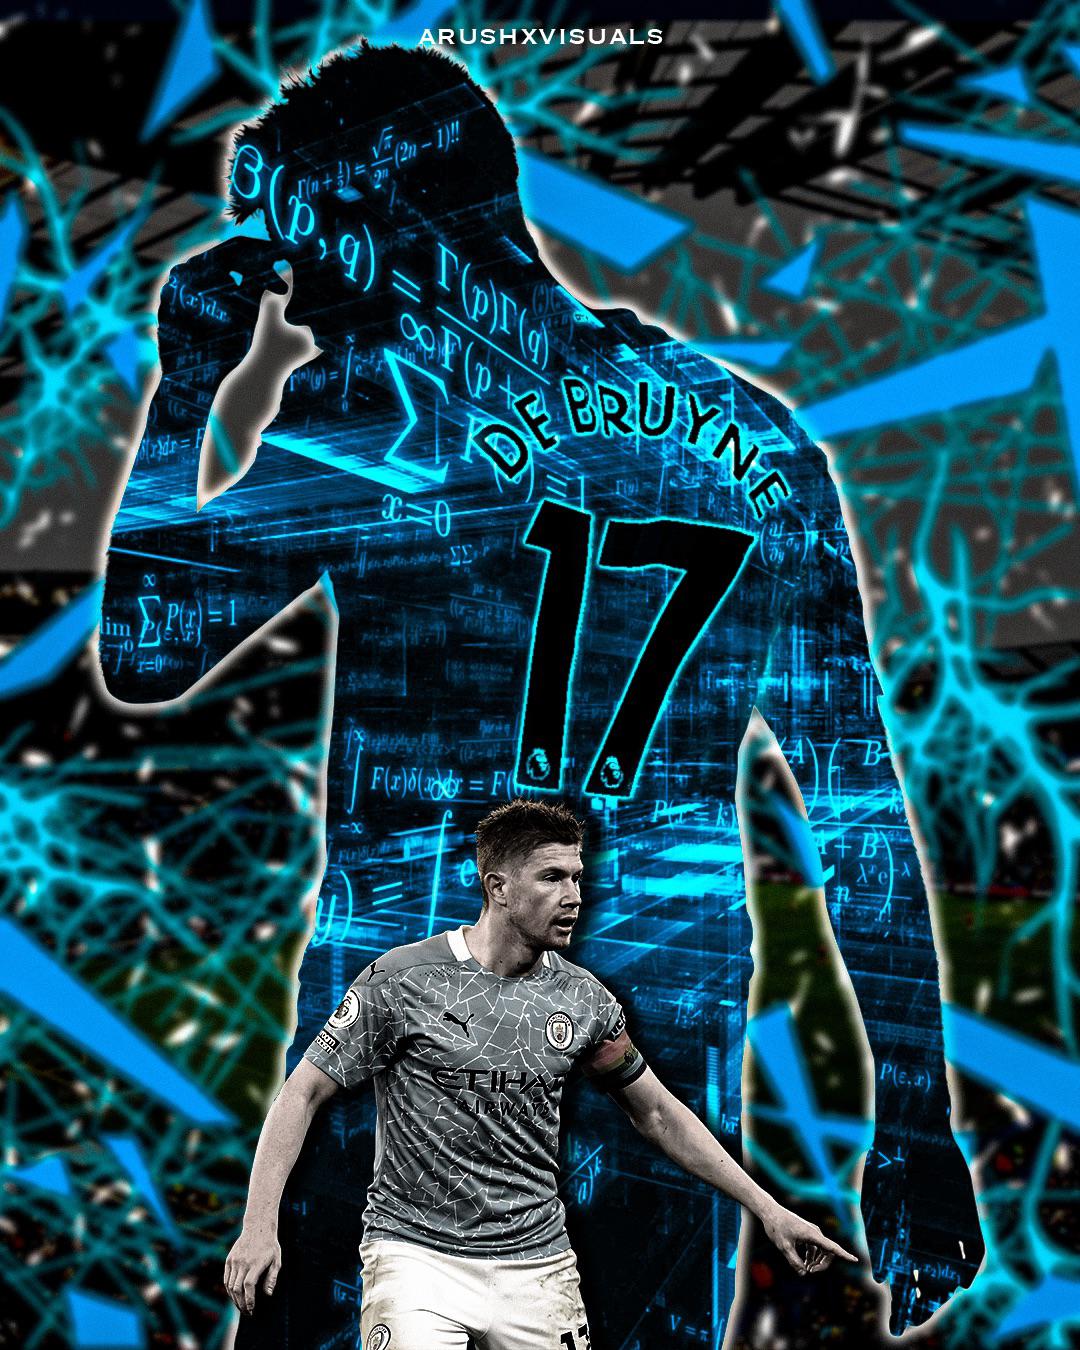 A Kevin de Bruyne wallpaper I made for yall to commemorate reaching your first ucl final! “Every. Pass. Calculated”